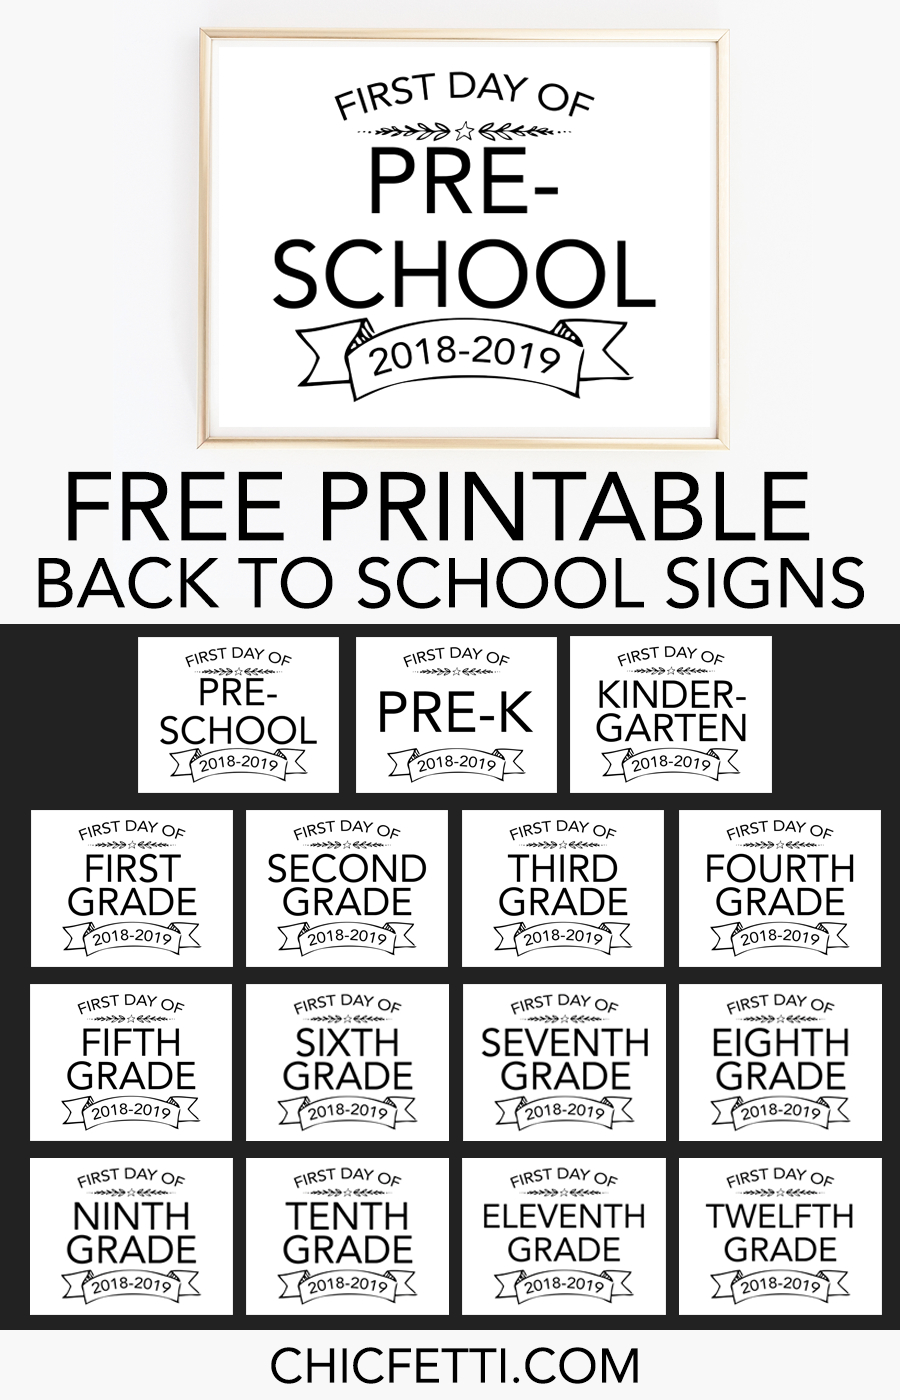 Printable Back To School Signs - Print Our Free First Day Of School - Free Printable First Day Of School Signs